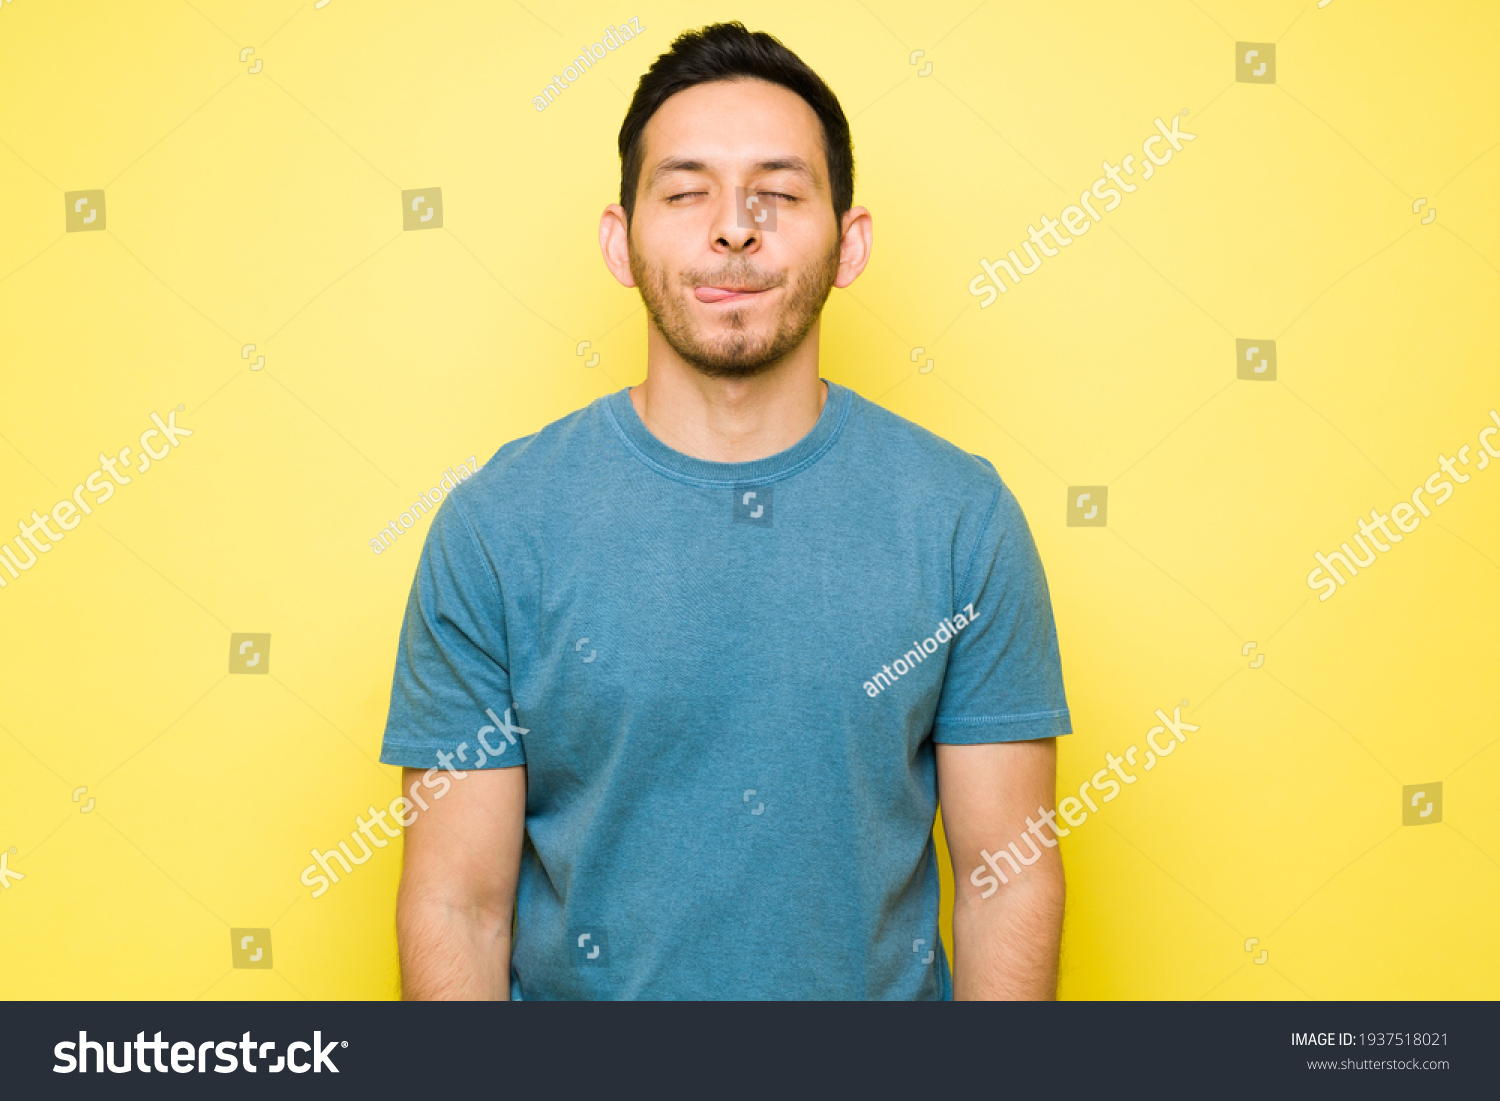 Cheerful man thinking about eating a delicious lunch with his eyes closed. Handsome man in his 30s licking his lips and craving a tasty dinner #1937518021